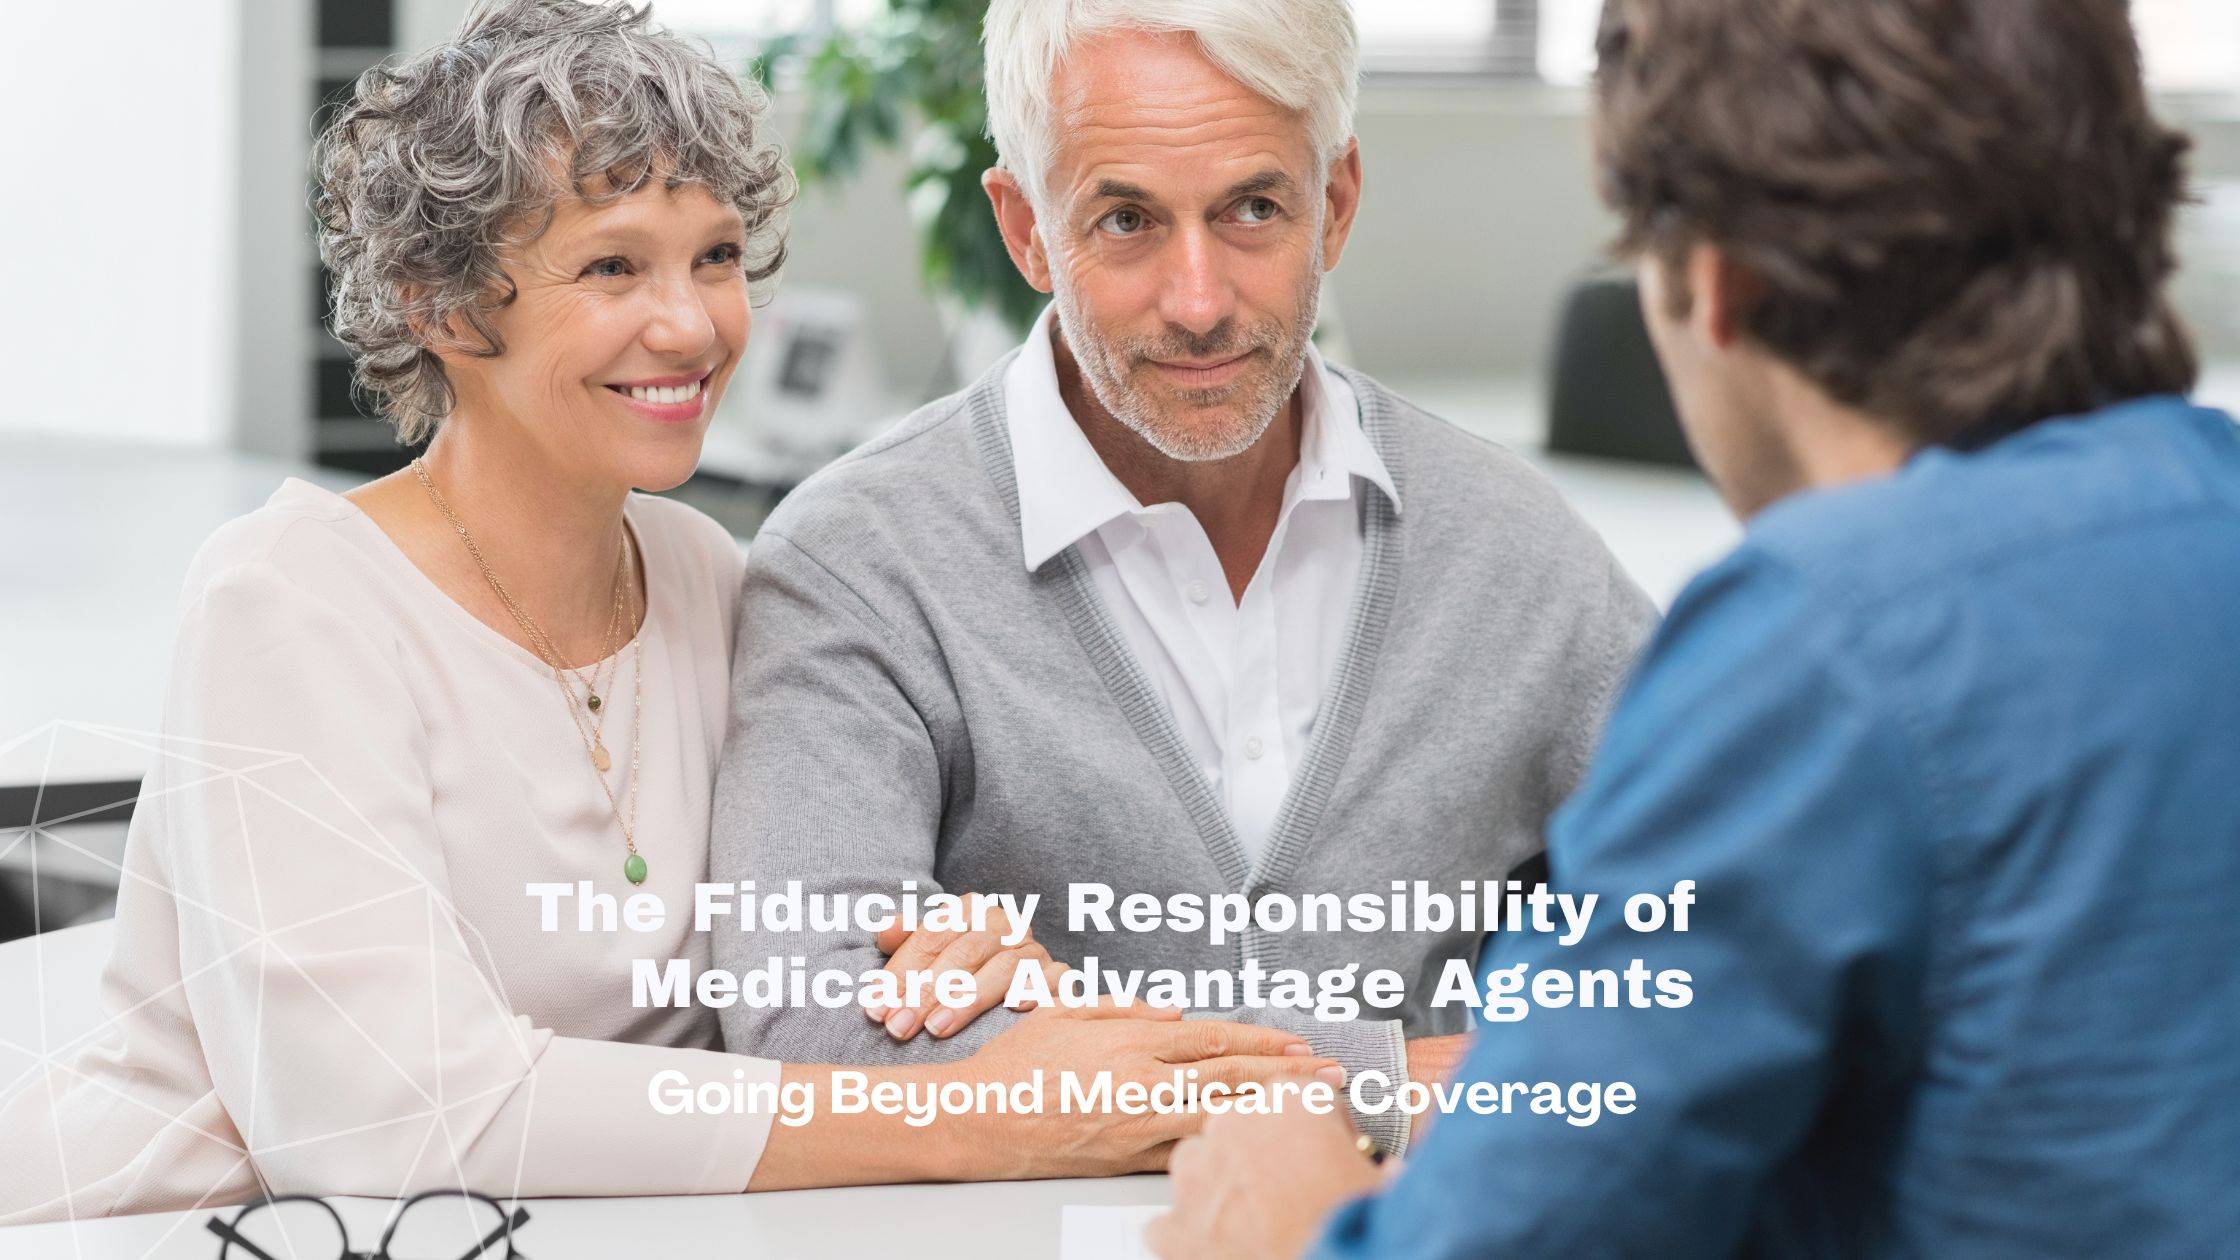 The Fiduciary Responsibility of Medicare Advantage Agents